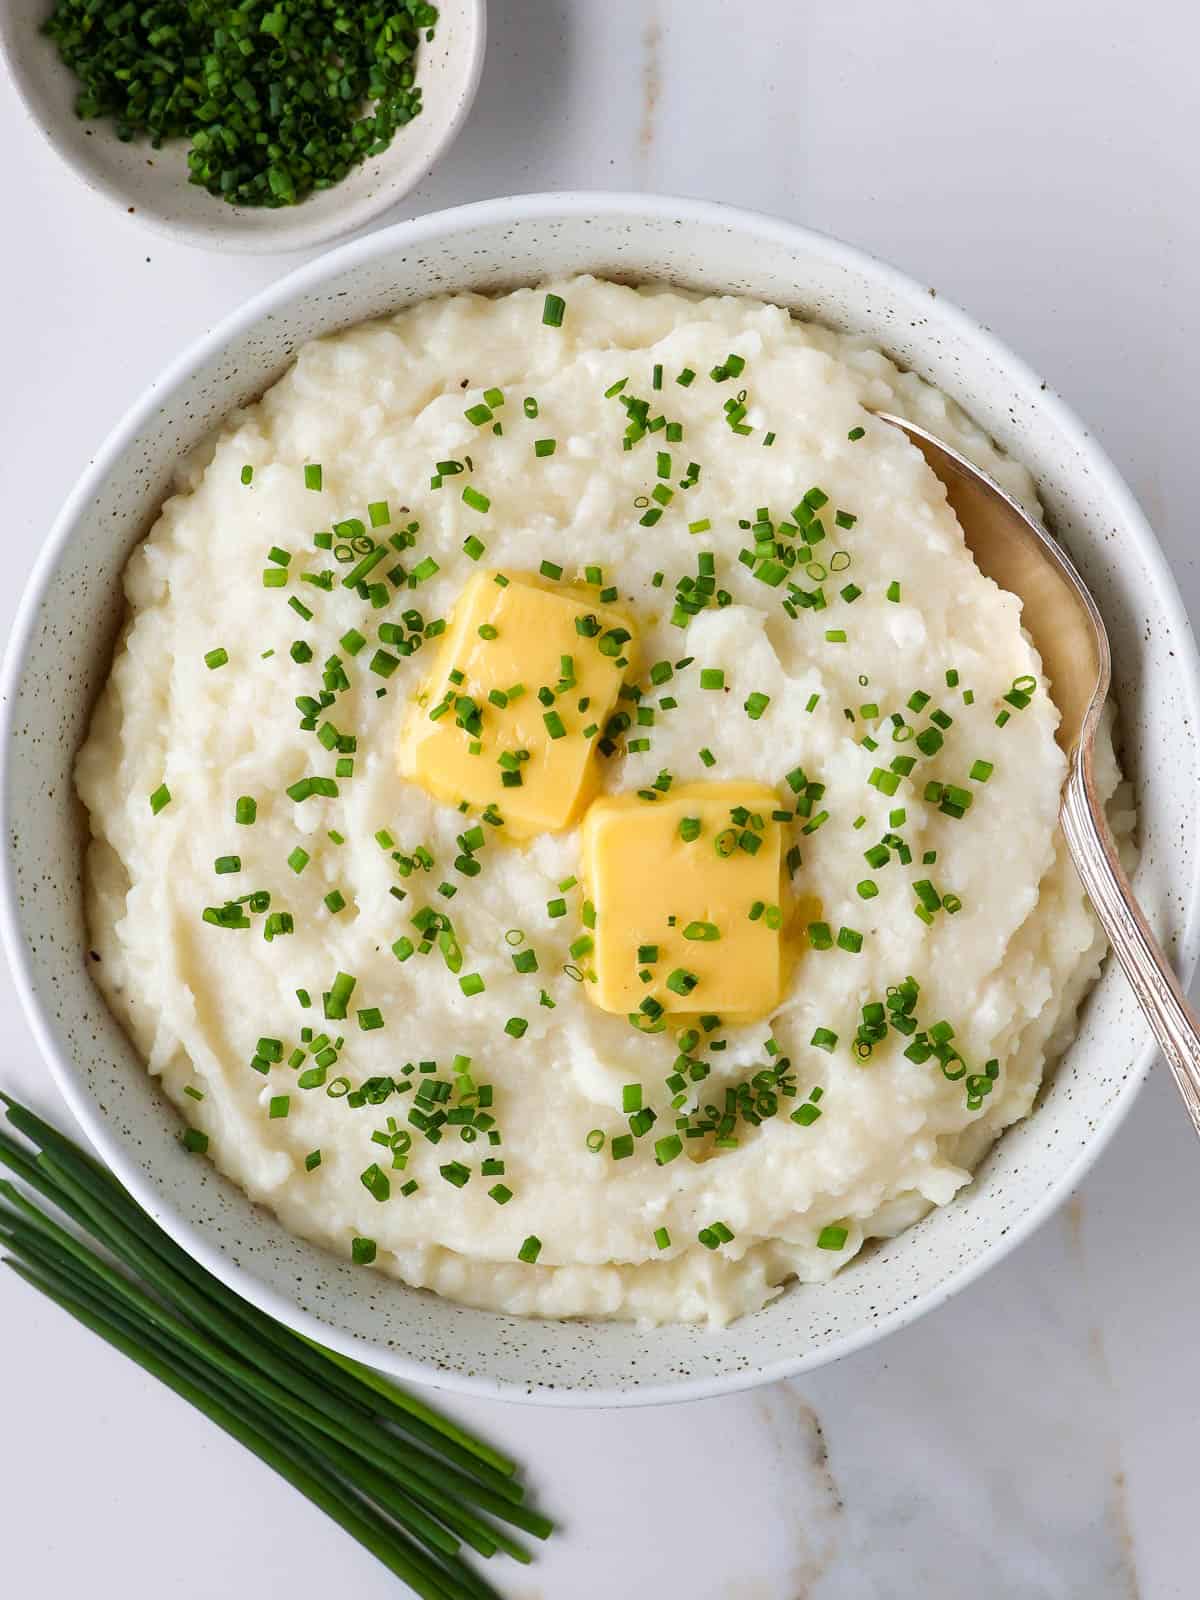 Mashed potatoes in a bowl with a spoon.